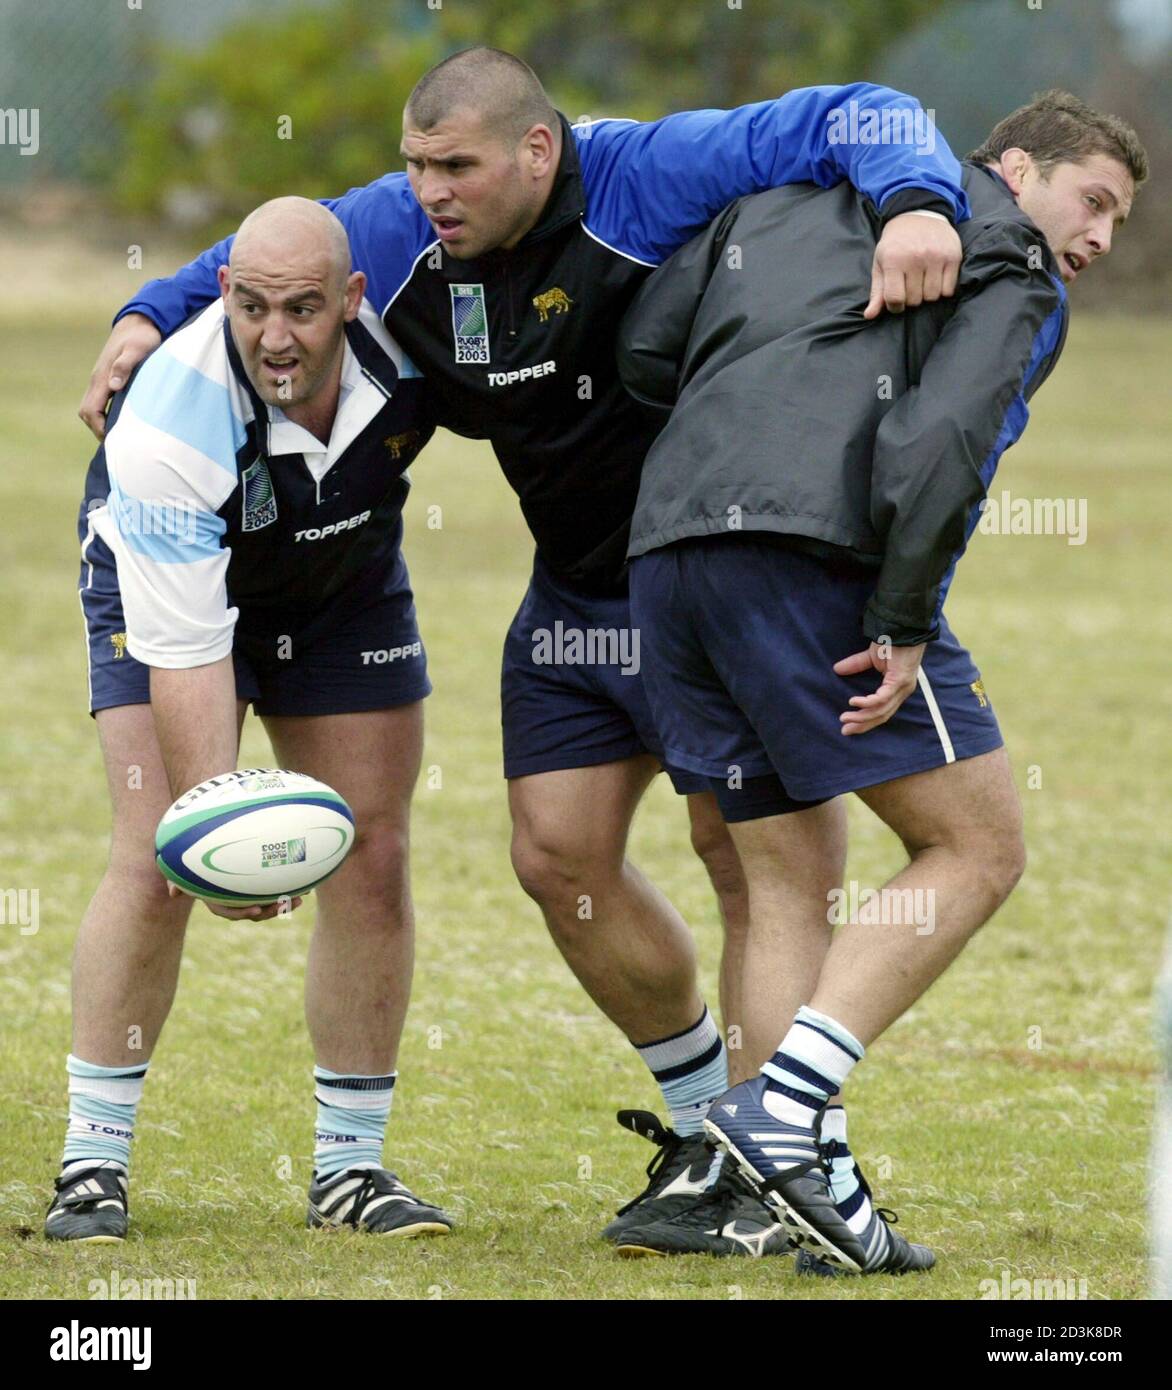 Argentine rugby players (L-R) Mario Ledesma, Martin Scelzo and Roberto Grau  train at the Randwick Army Barracks in Sydney October 3, 2003. The  Argentine team Los Pumas will face Australia October 10